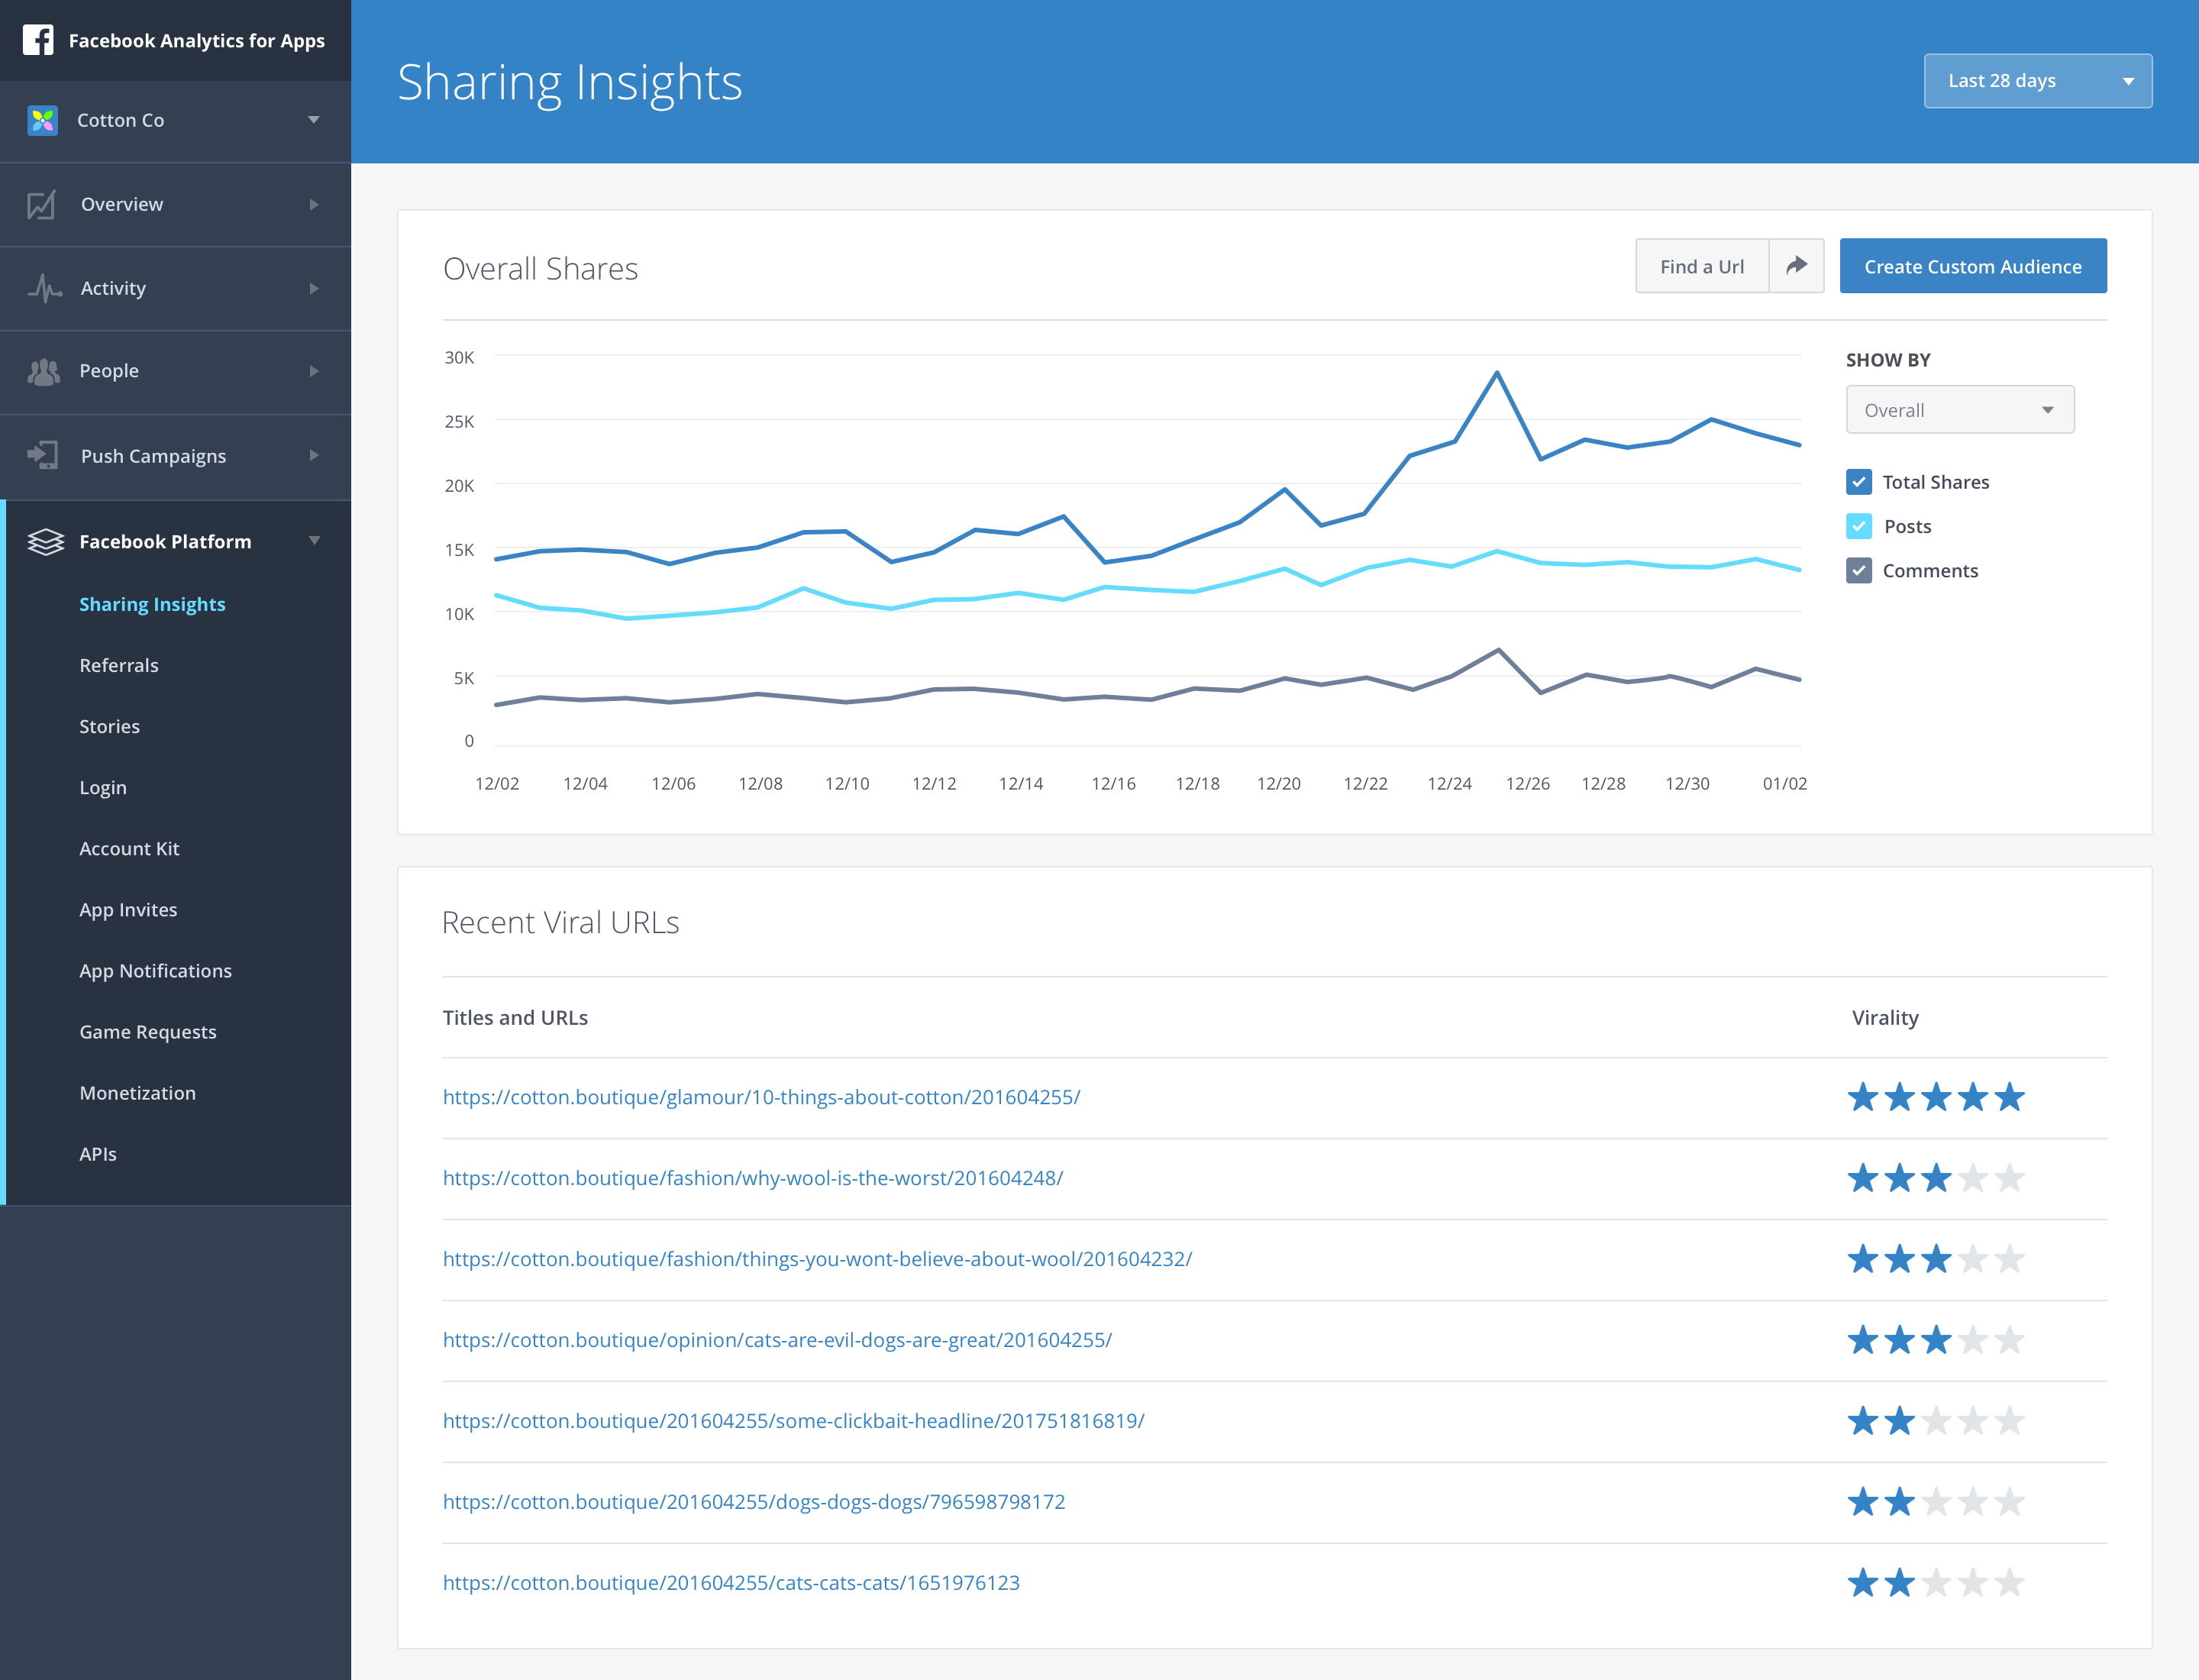 Facebook Analytics for Apps sharing insights